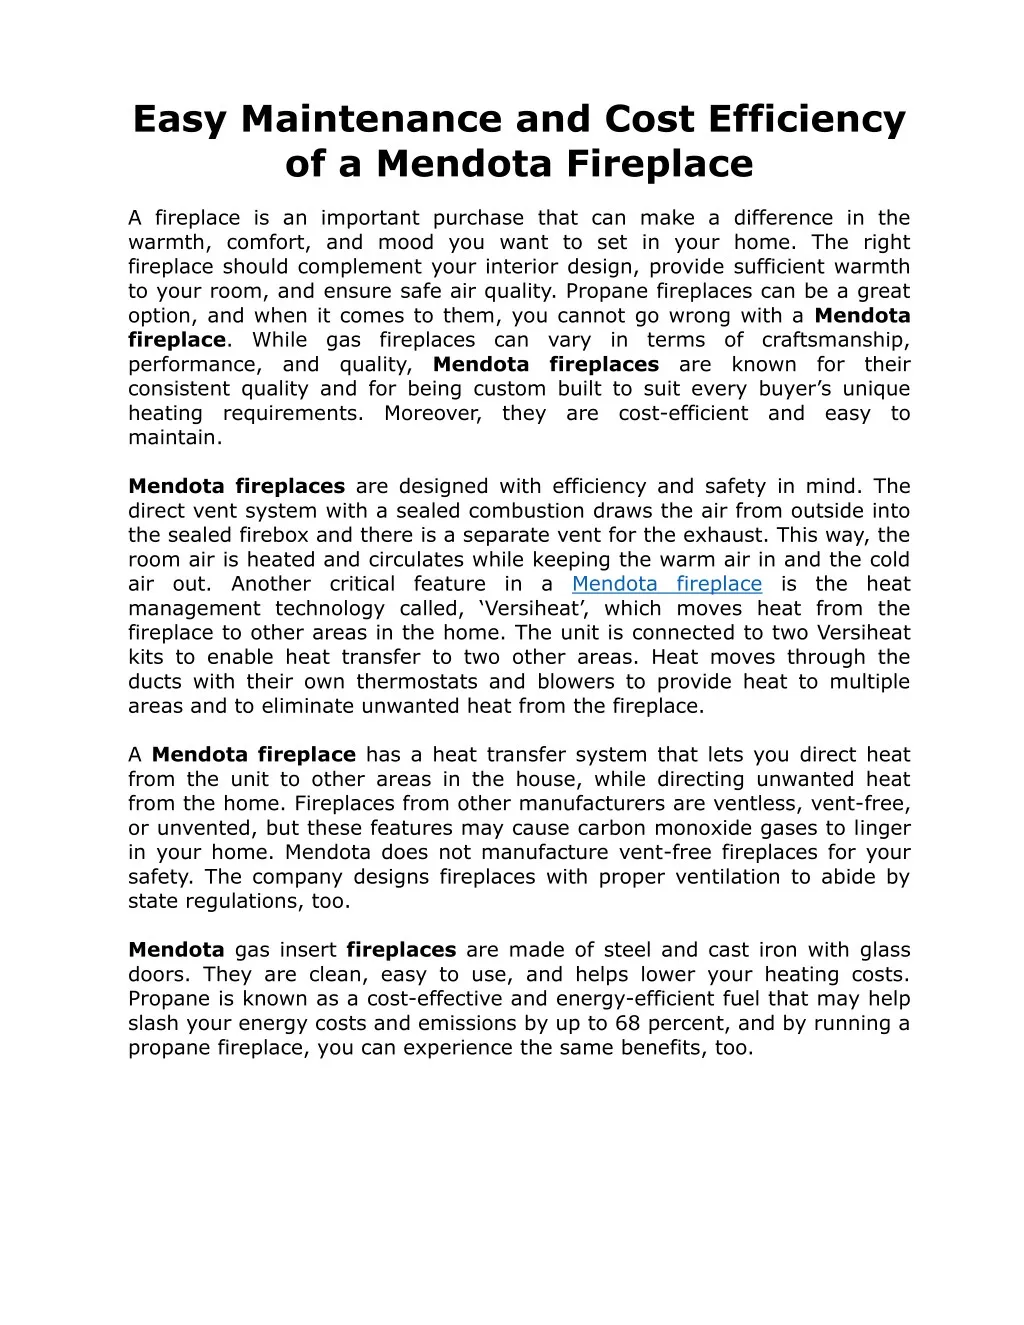 easy maintenance and cost efficiency of a mendota